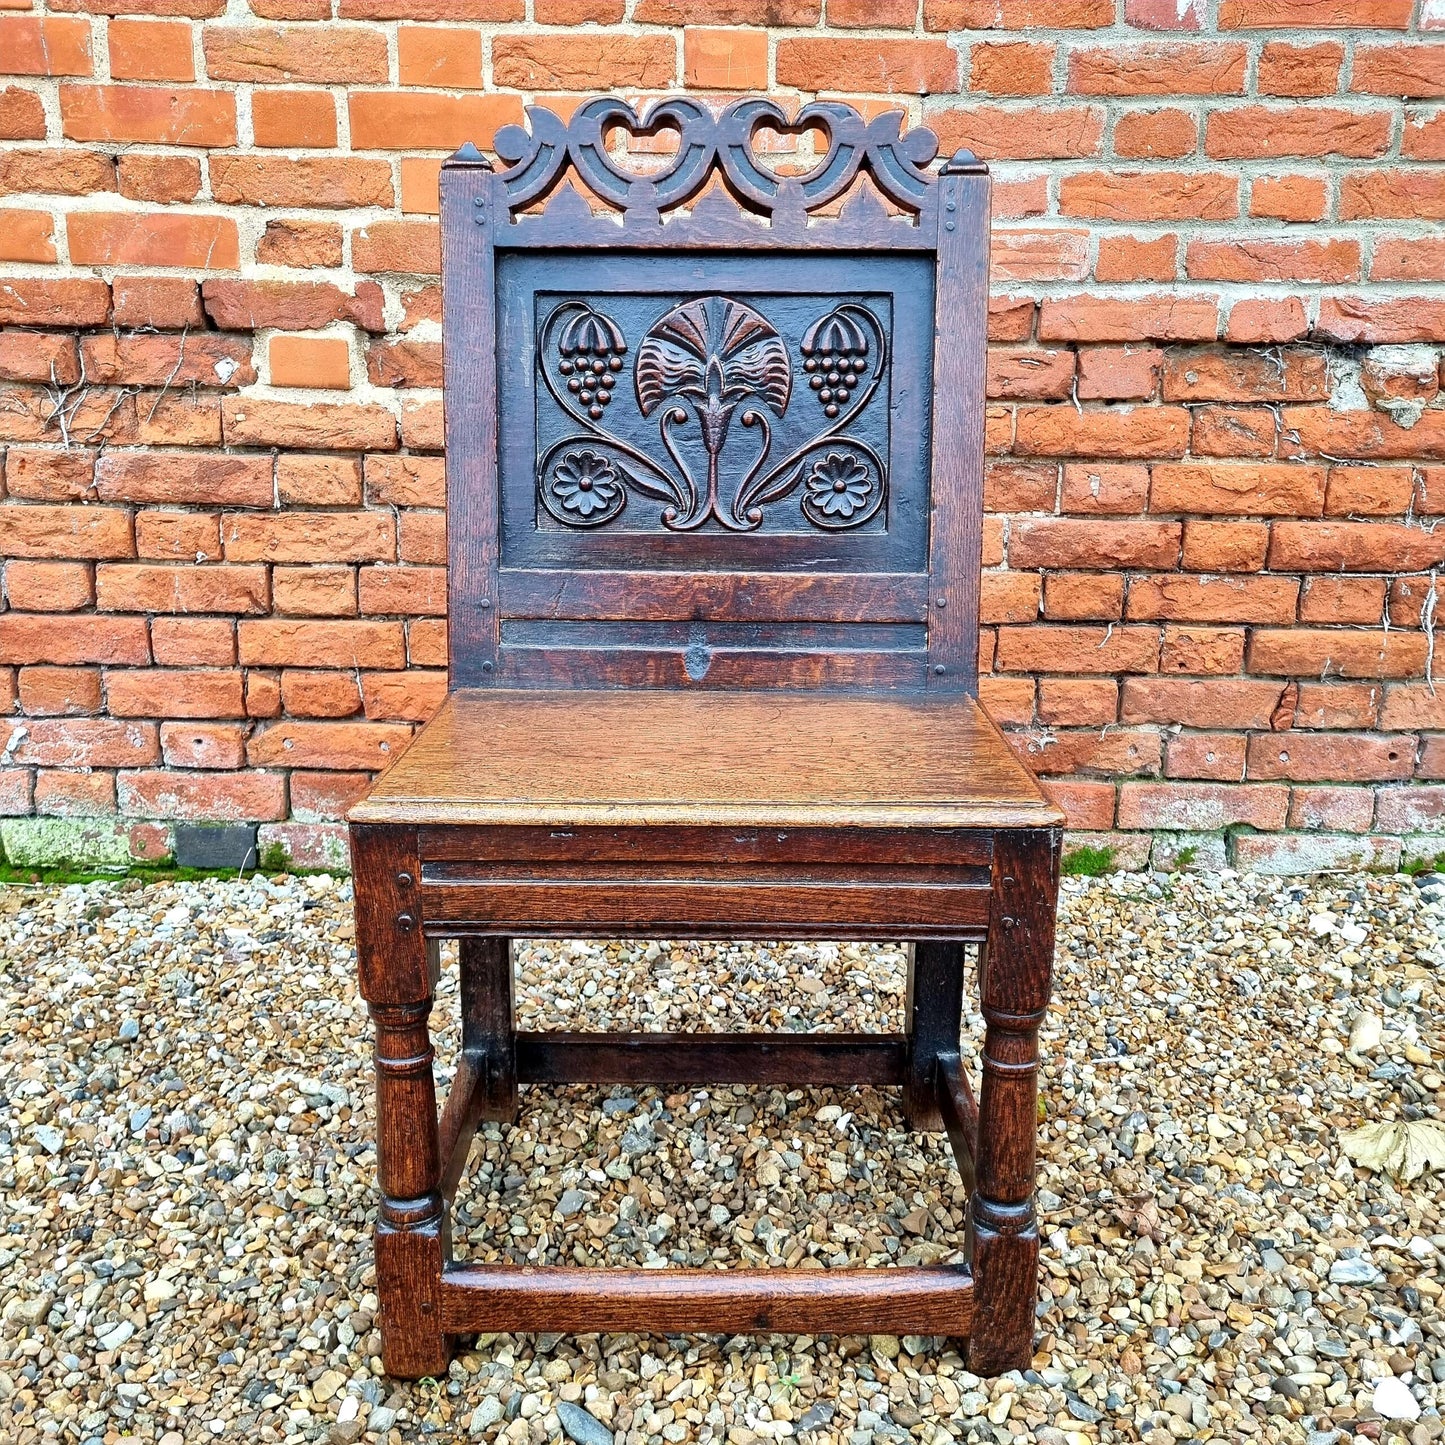 Mid 17th Century English Antique Oak Back Stool, Circa 1640. A similar example is held in the collection of the Victoria and Albert Museum, London